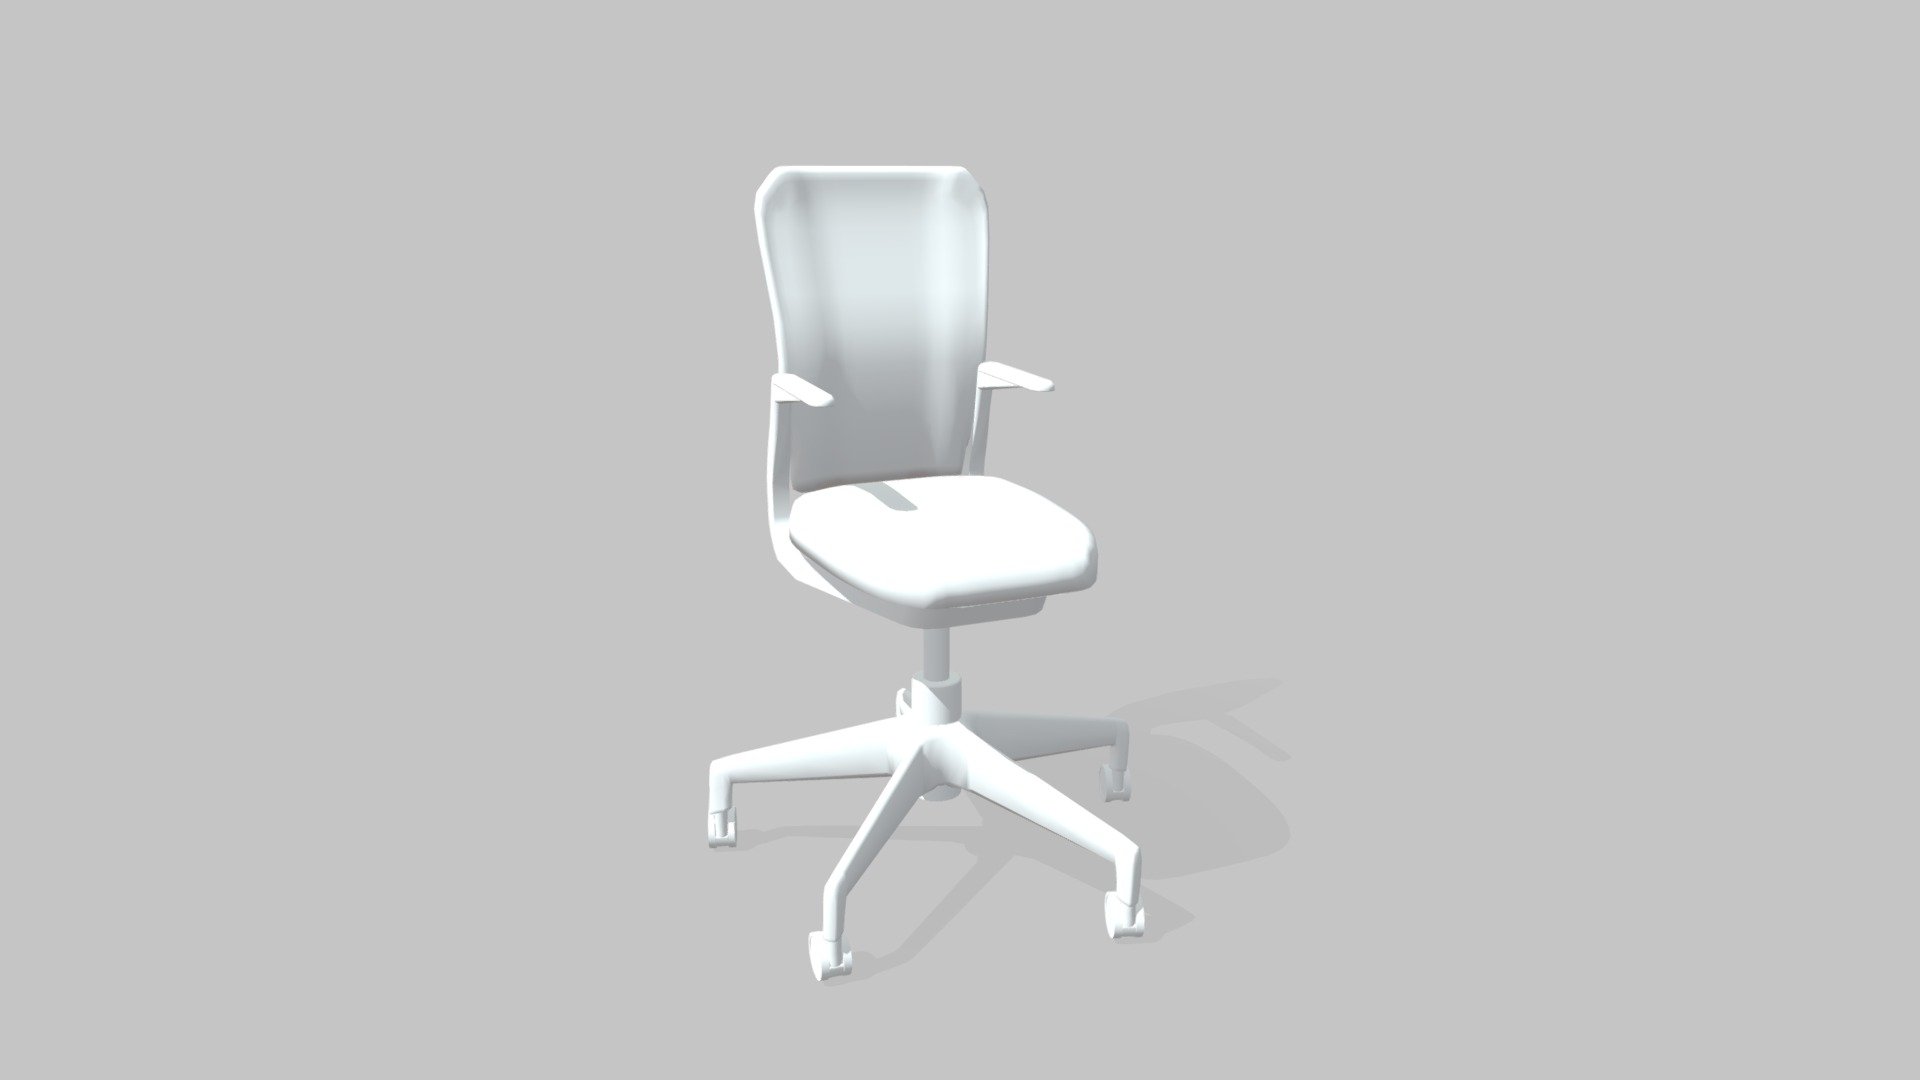 Grayscale Chair Final